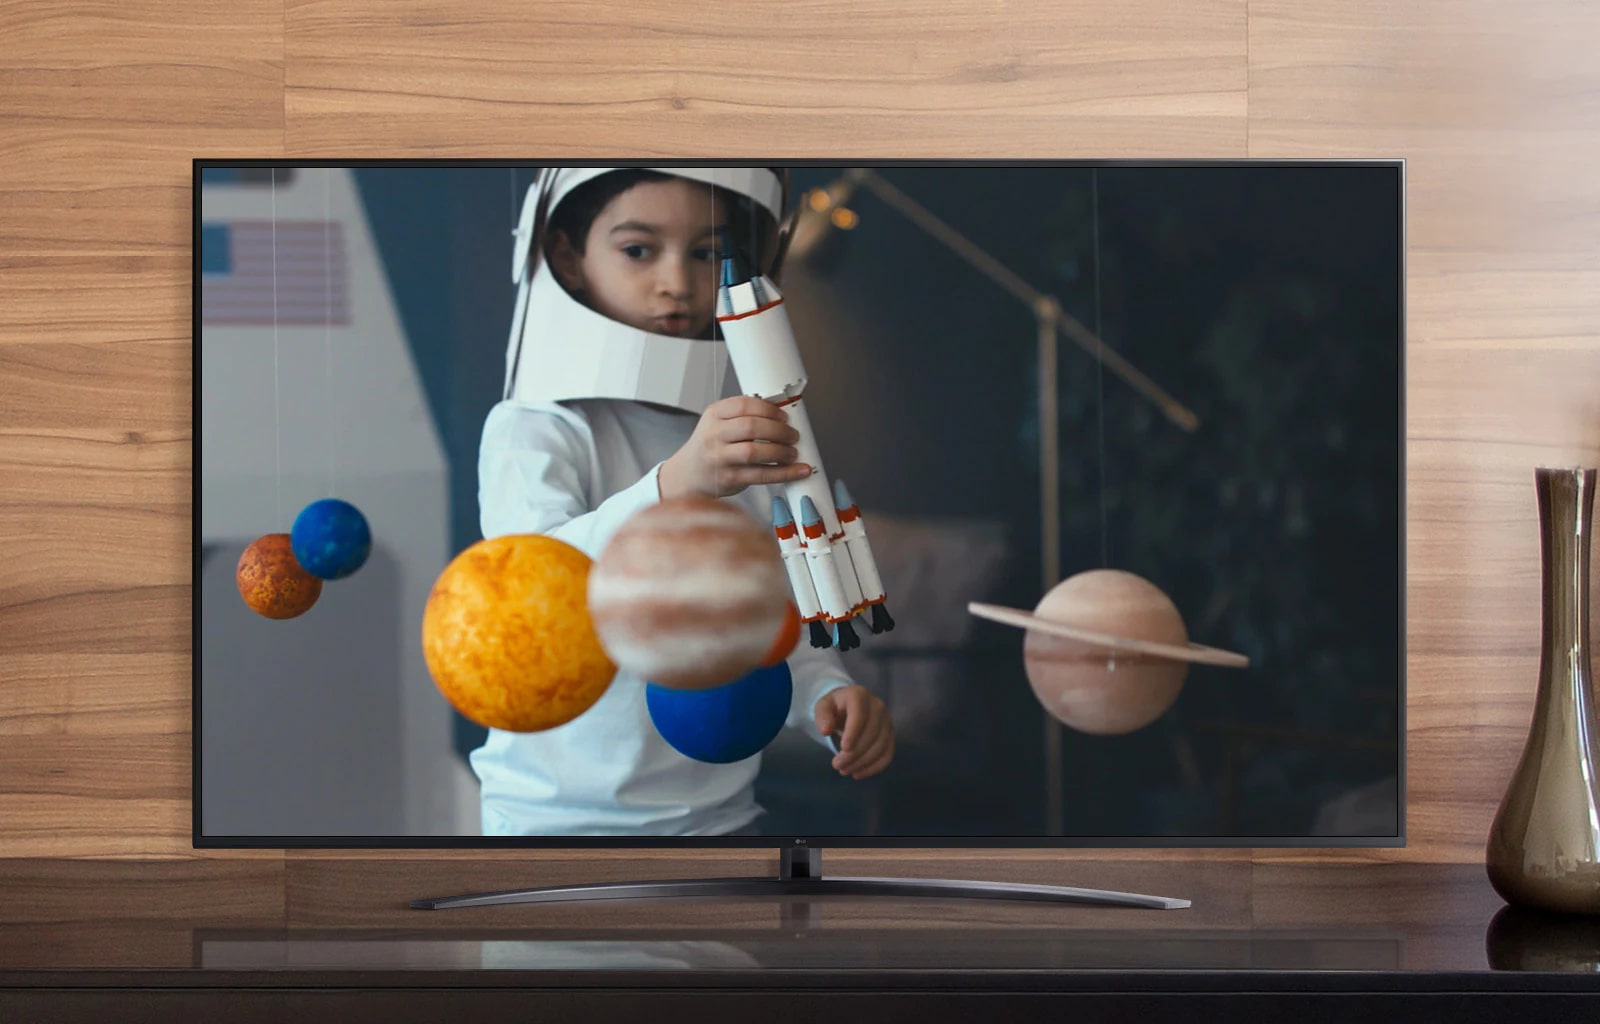 A television screen that plays a video of a boy in an astronaut suit that he made playing with a spaceship in his room decorated with miniature planets (watch the video)